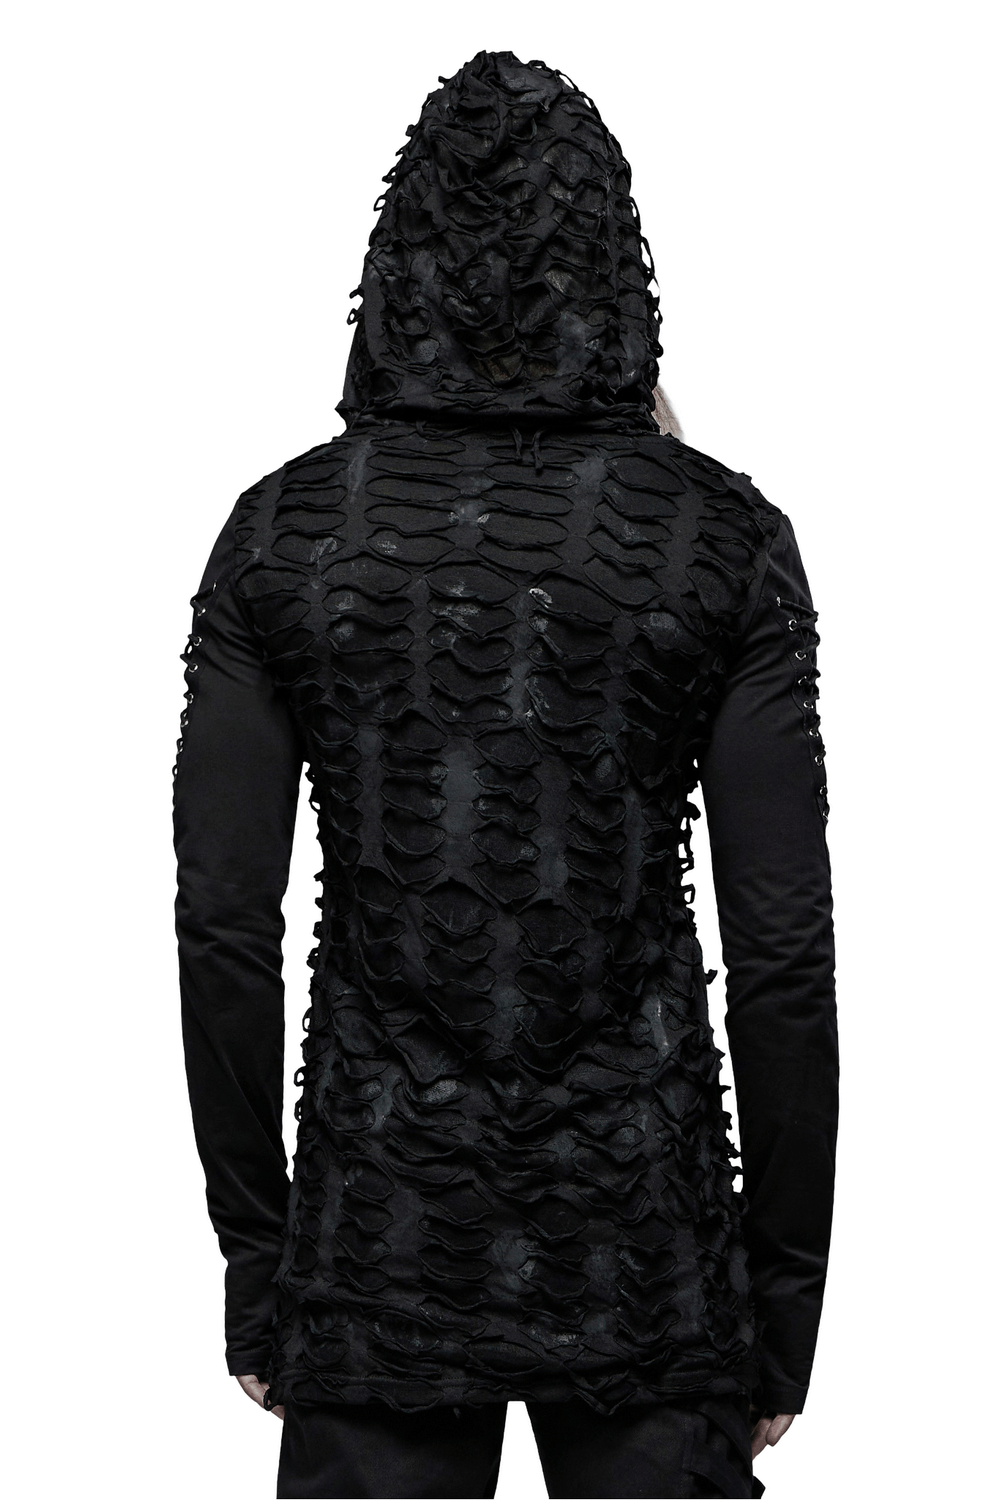 Dark Mysterious Long Sleeves Ripped Hoodie With Lace Up